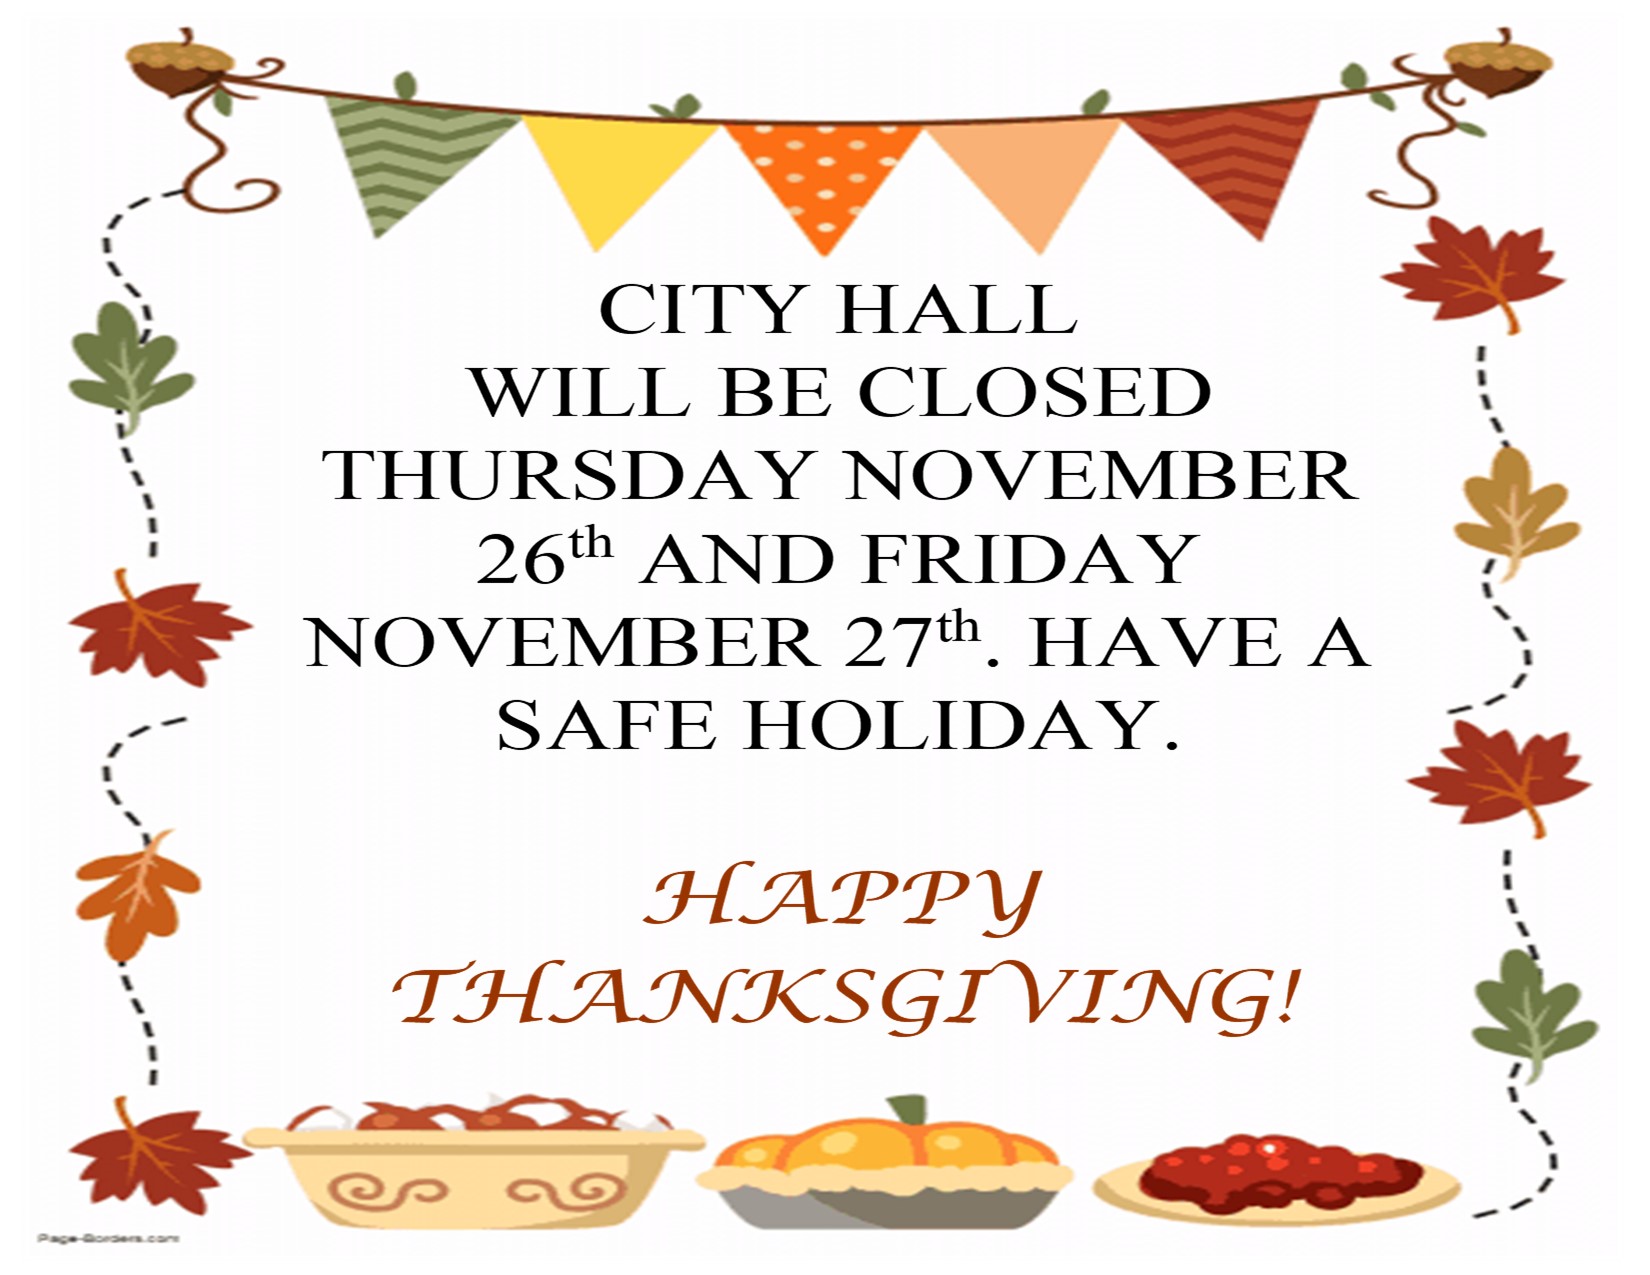 City Hall Closed for Thanksgiving - City of Jefferson Iowa